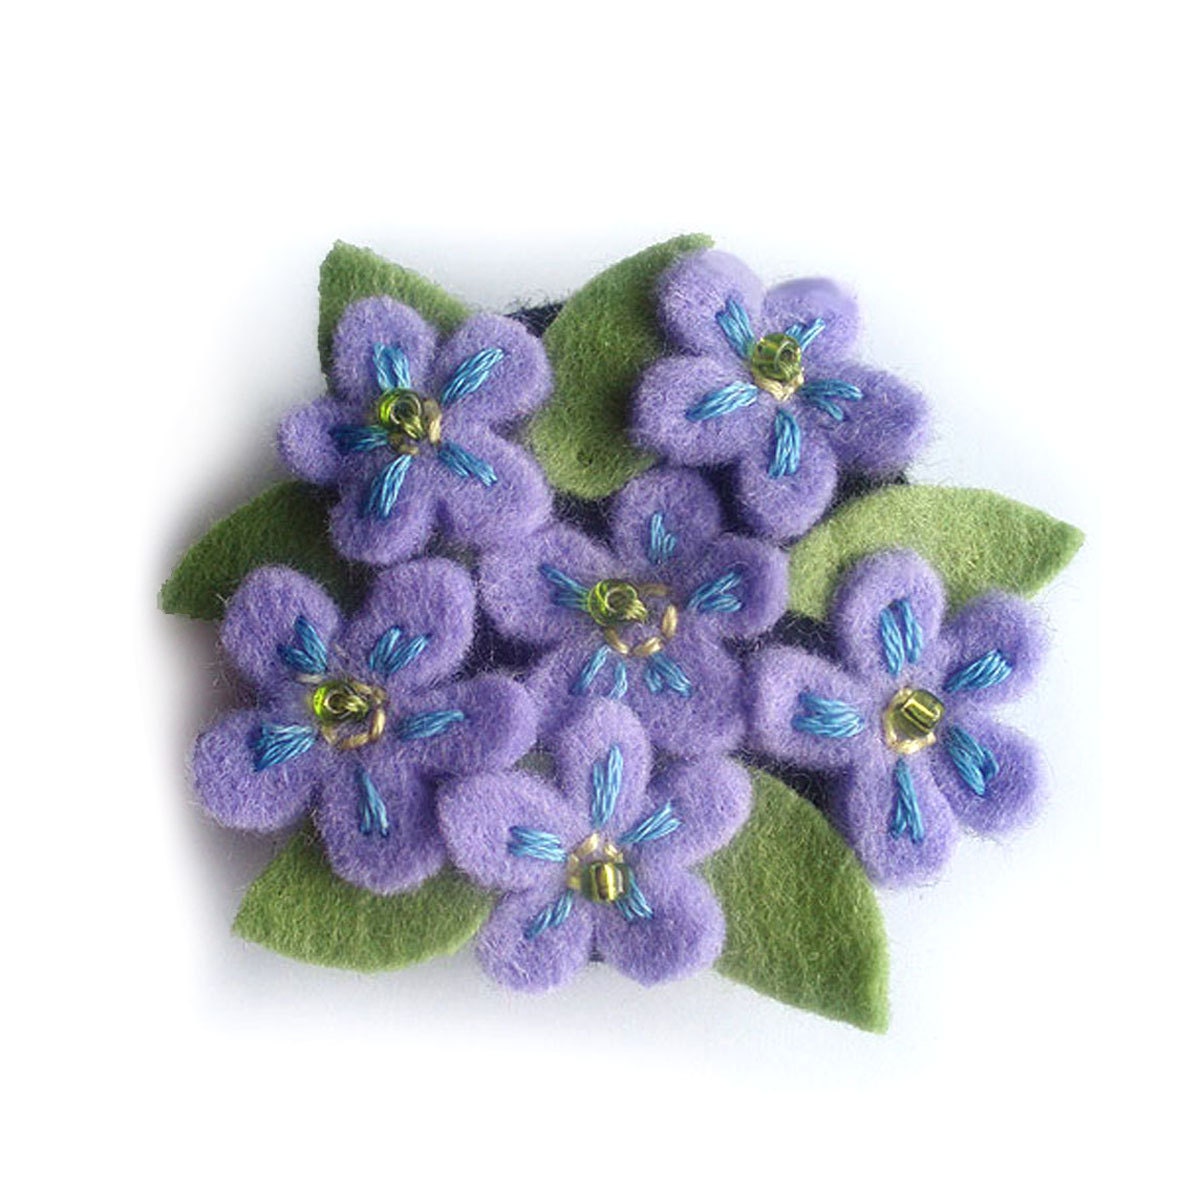 Forget Me Not Brooch, Felt Flower Brooch Pin, Purple Blue Flowers Unique Mum Gift, Spring Embroidered Small